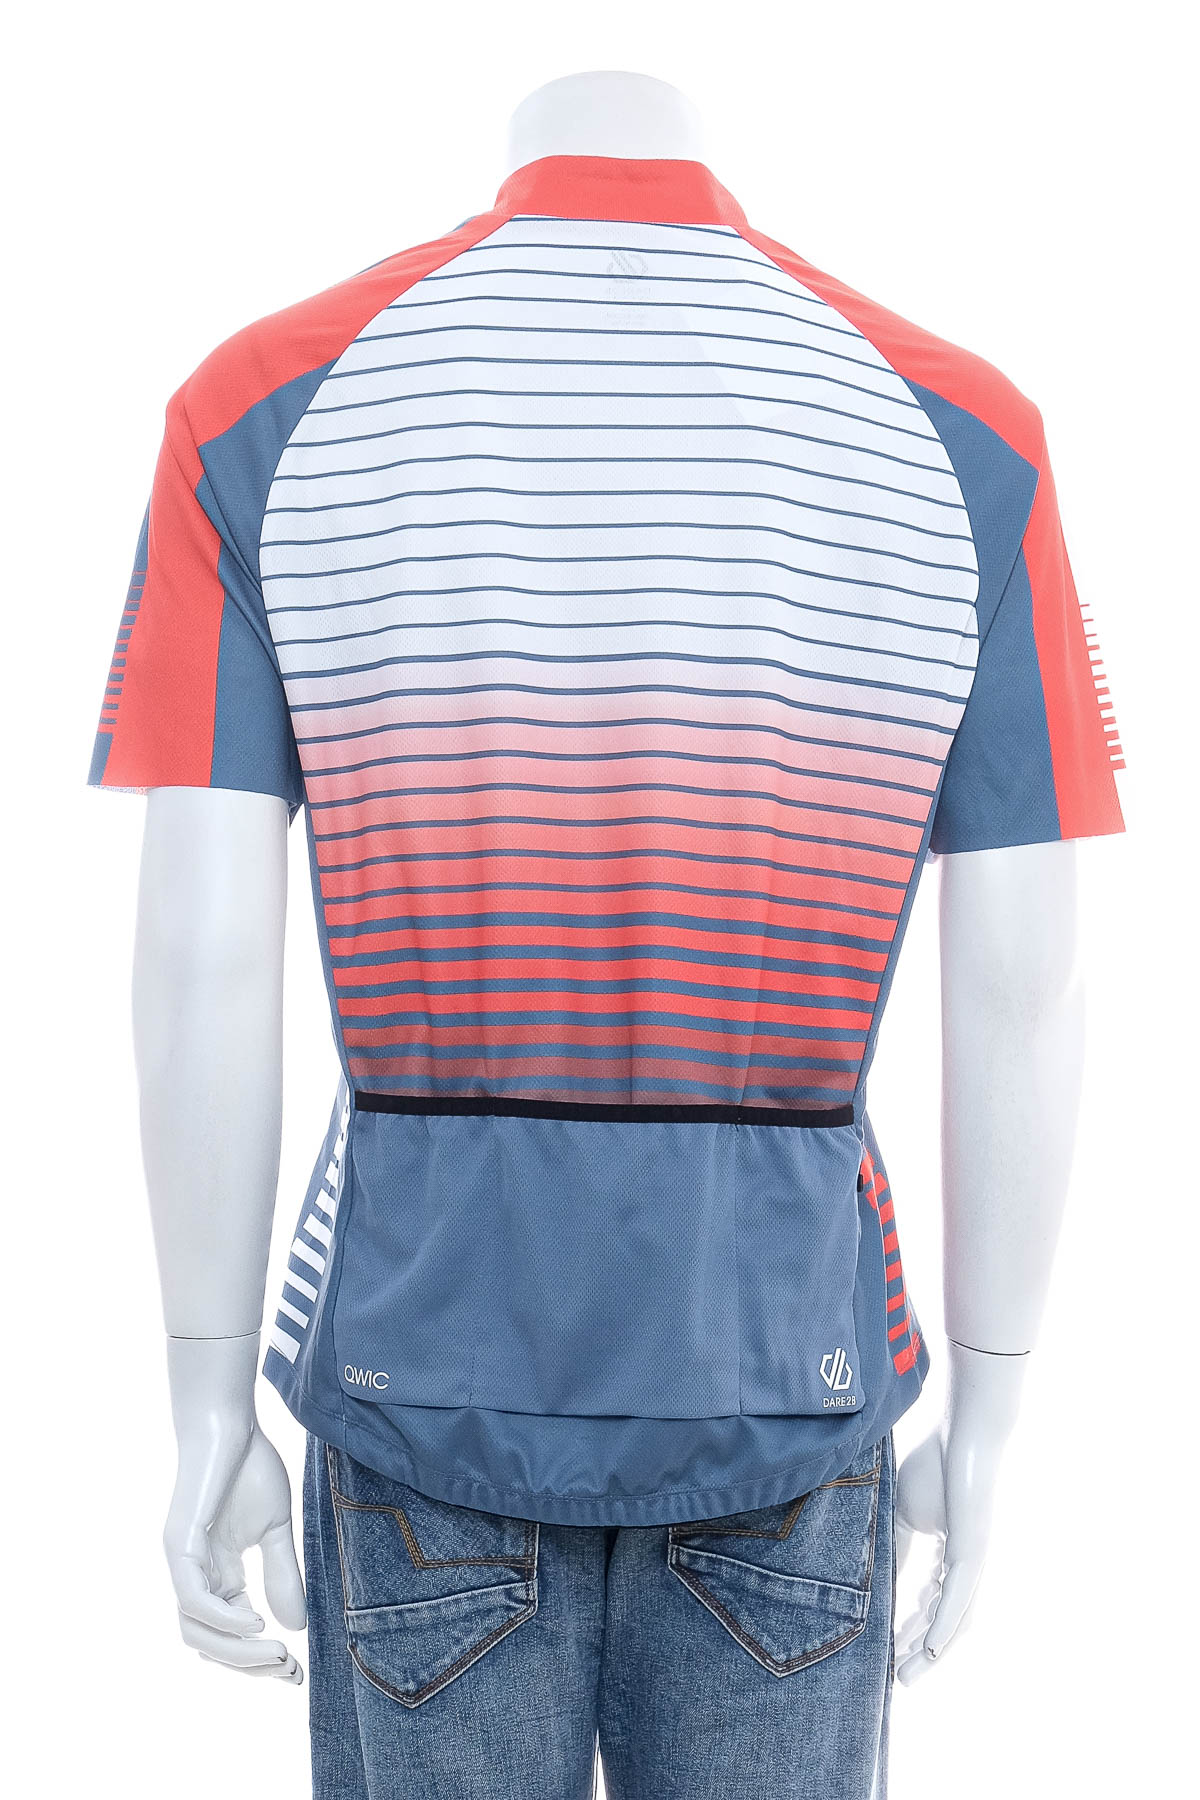 Male sports top for cycling - Dare 2b - 1